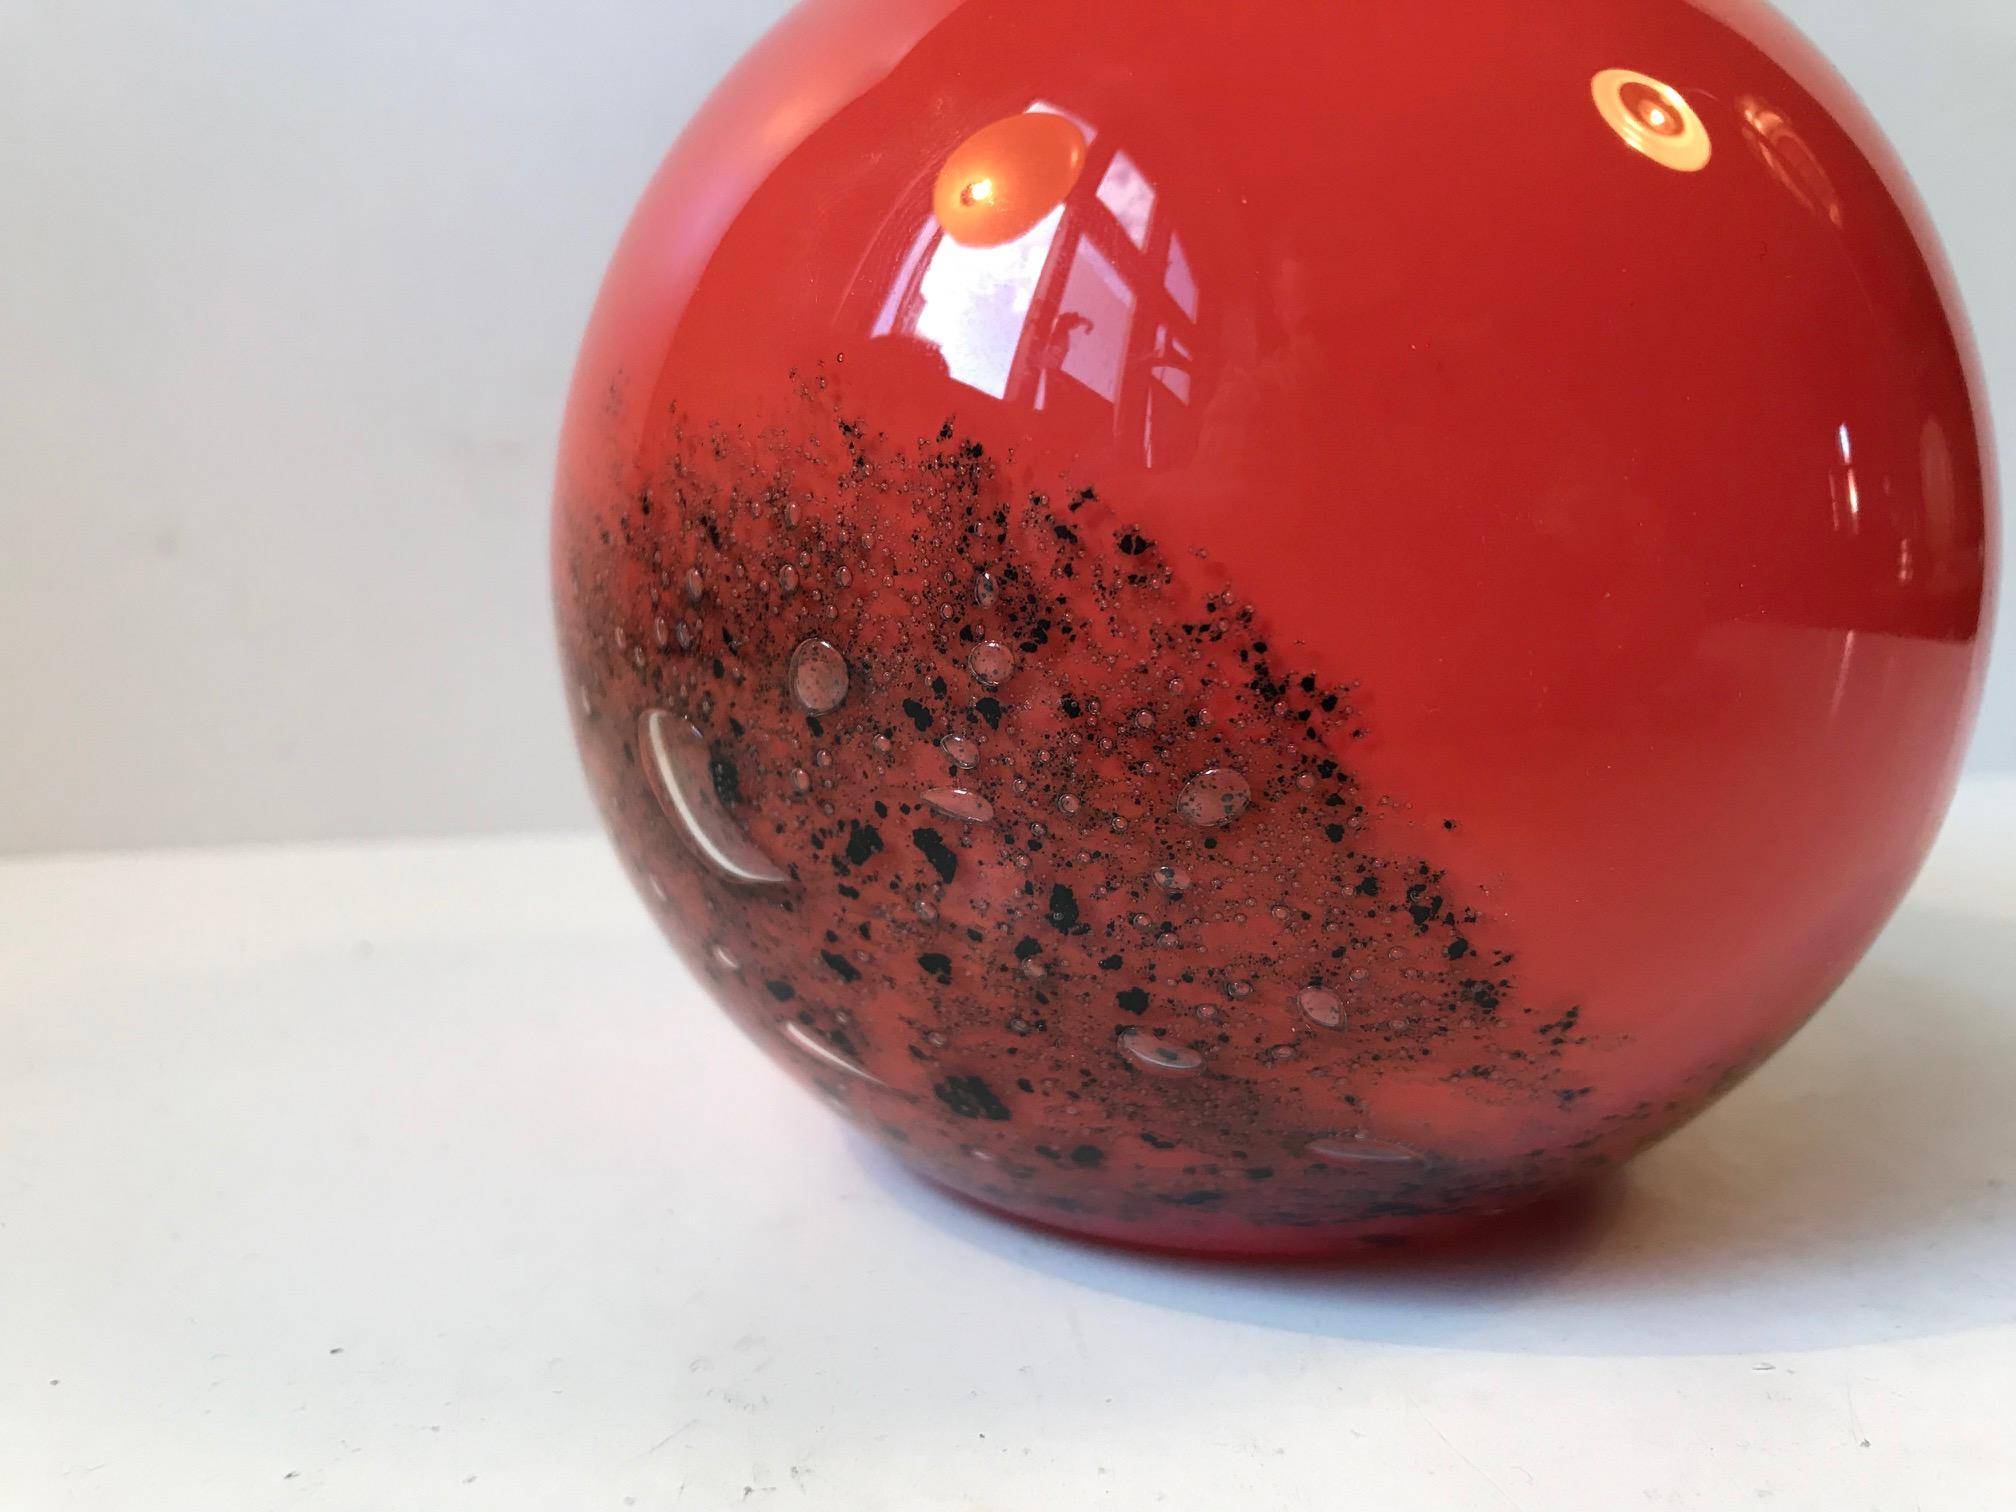 Colorful art glass vase by Czech designer Frantisek Koudelka. Hand blown orange glass with infused coal and air bubbles.